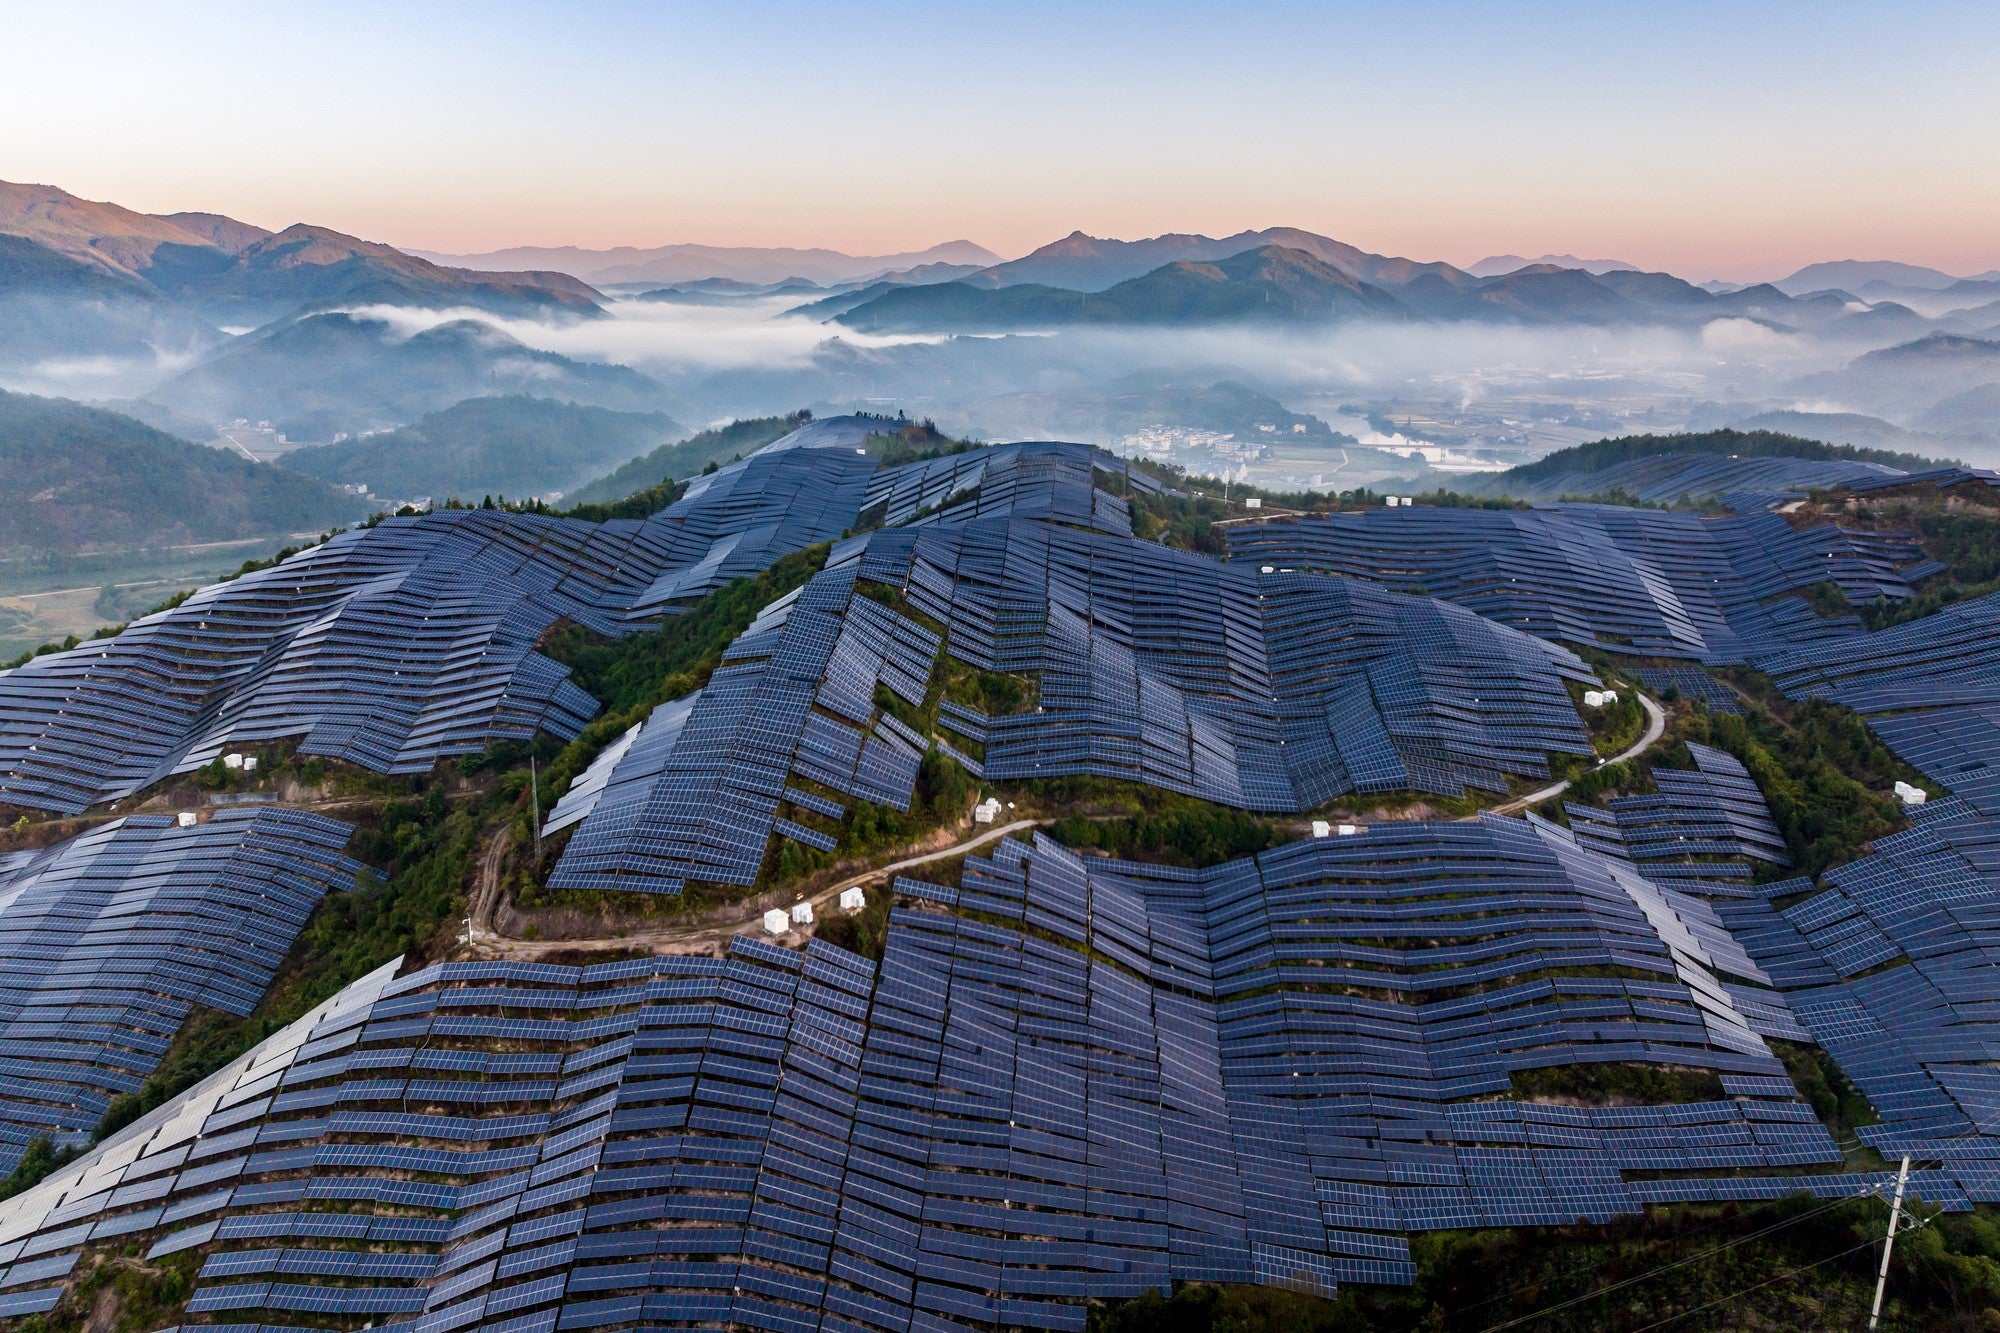 China has installed more than 600 gigawatts of solar capacity, making use of uninhabited mountainous and desert areas